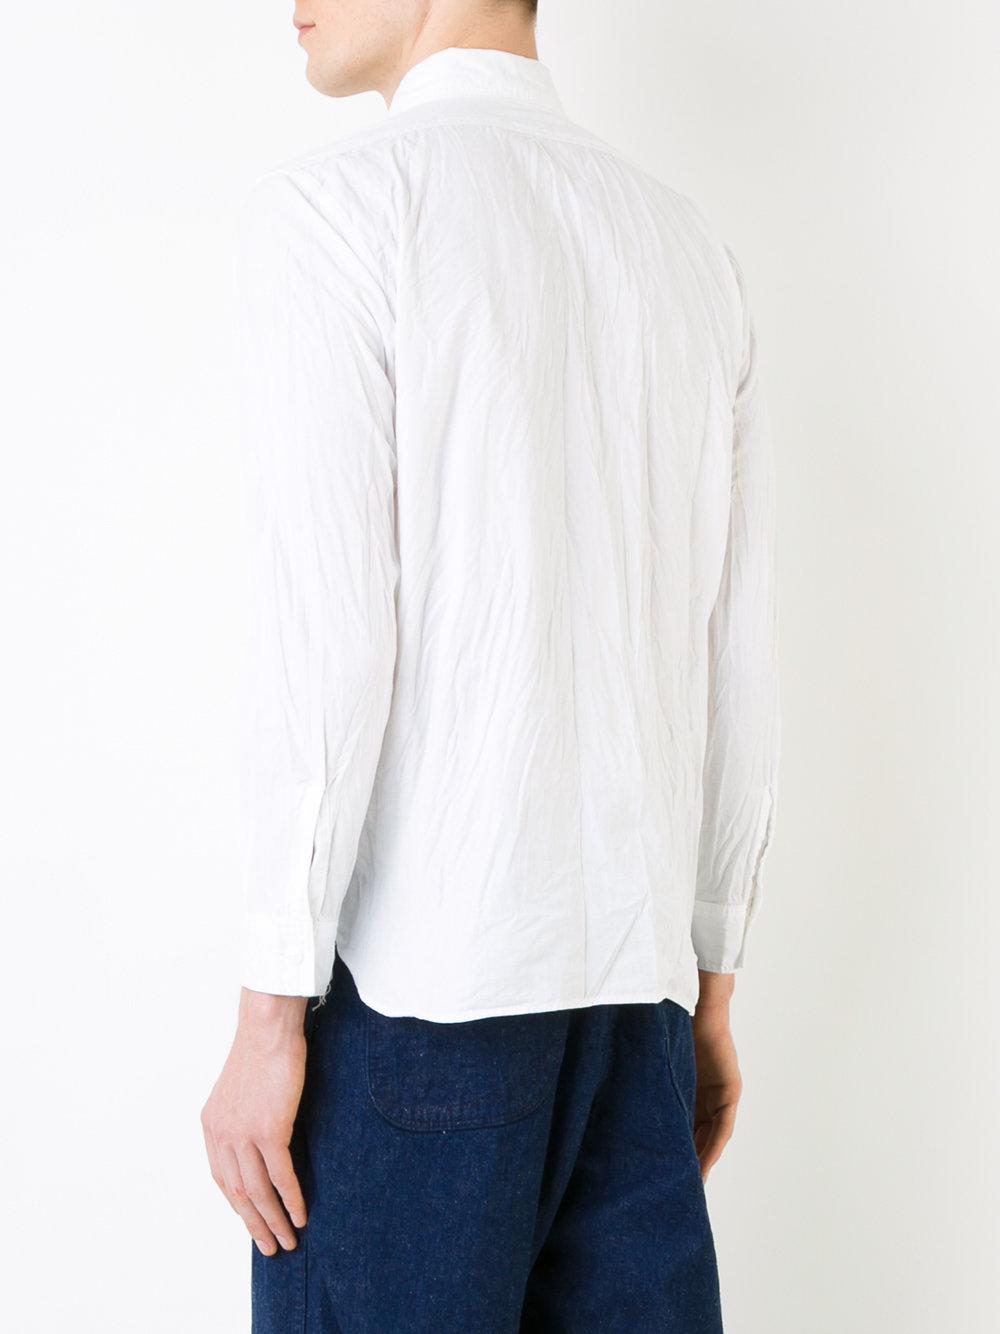 Orslow Cotton Chambray Shirt in White for Men - Lyst